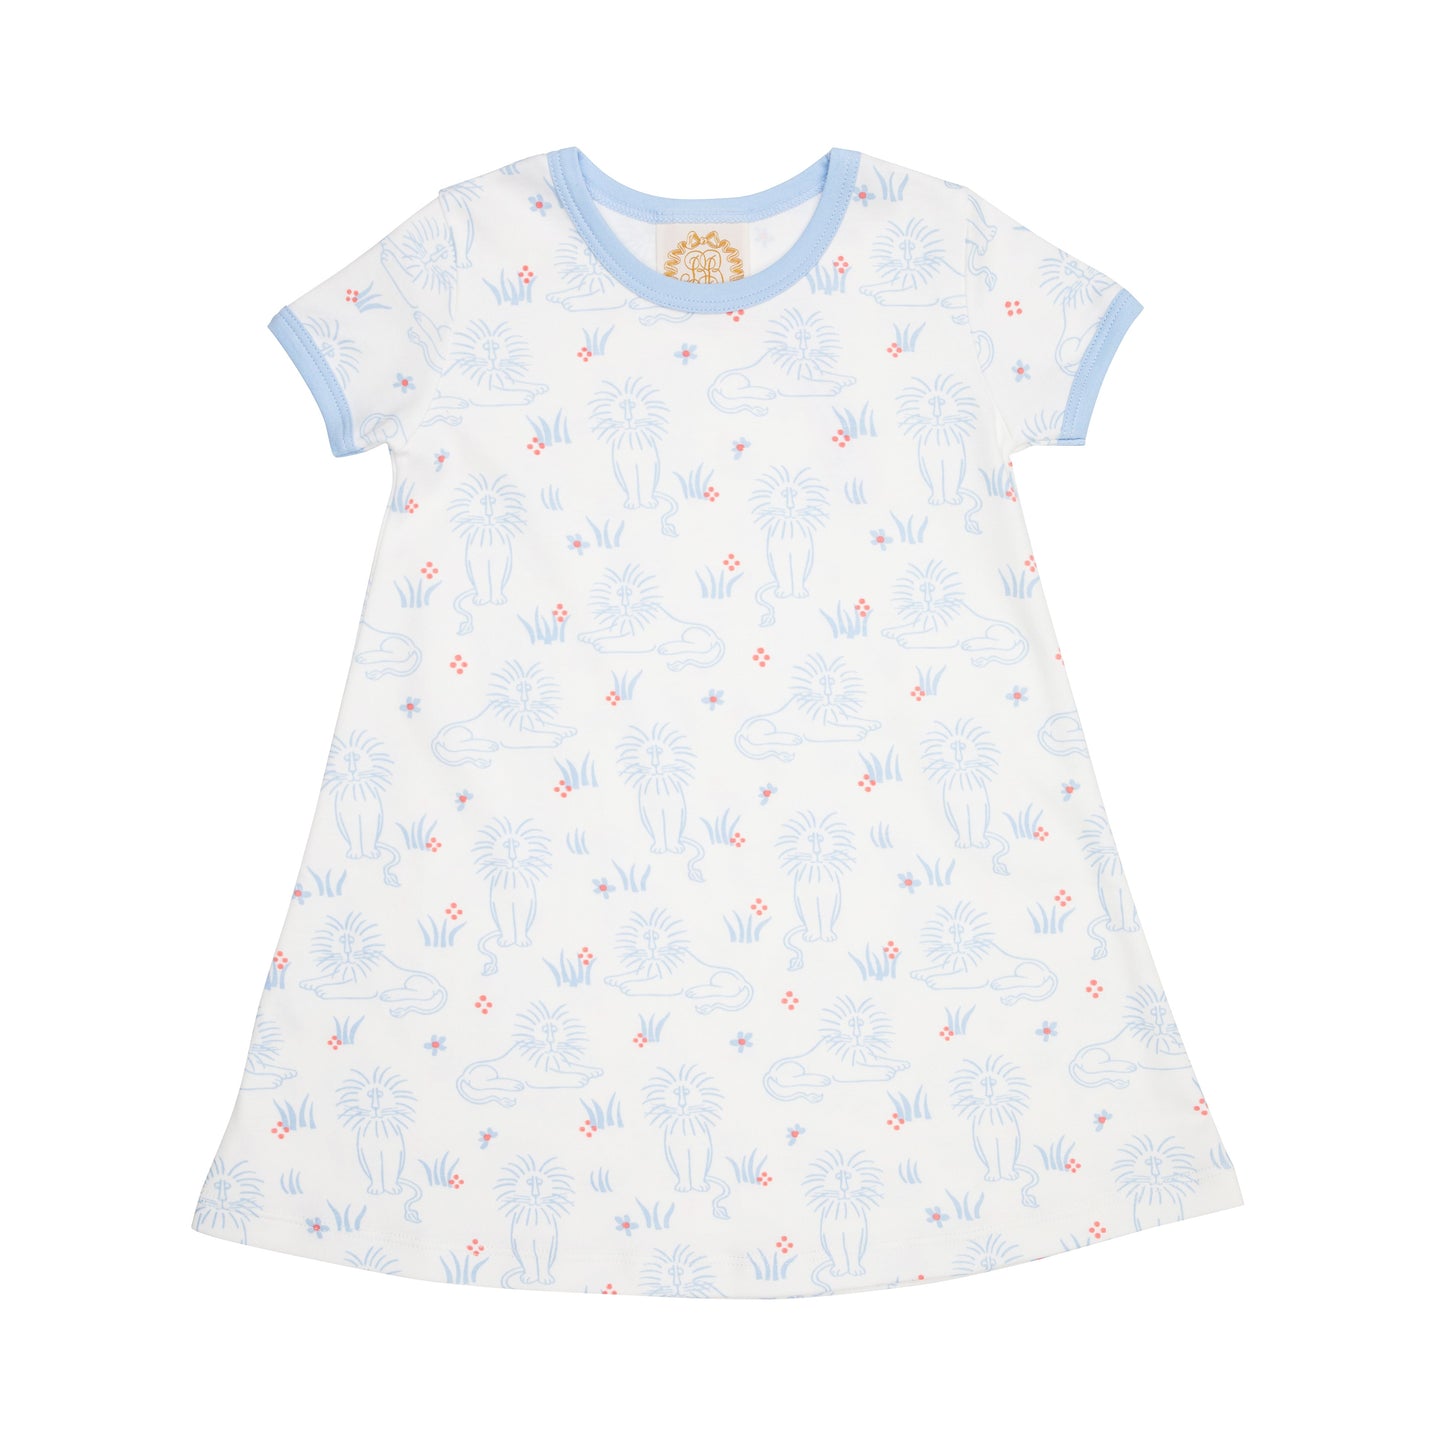 POLLY PLAY DRESS SS - JUST LION AROUND